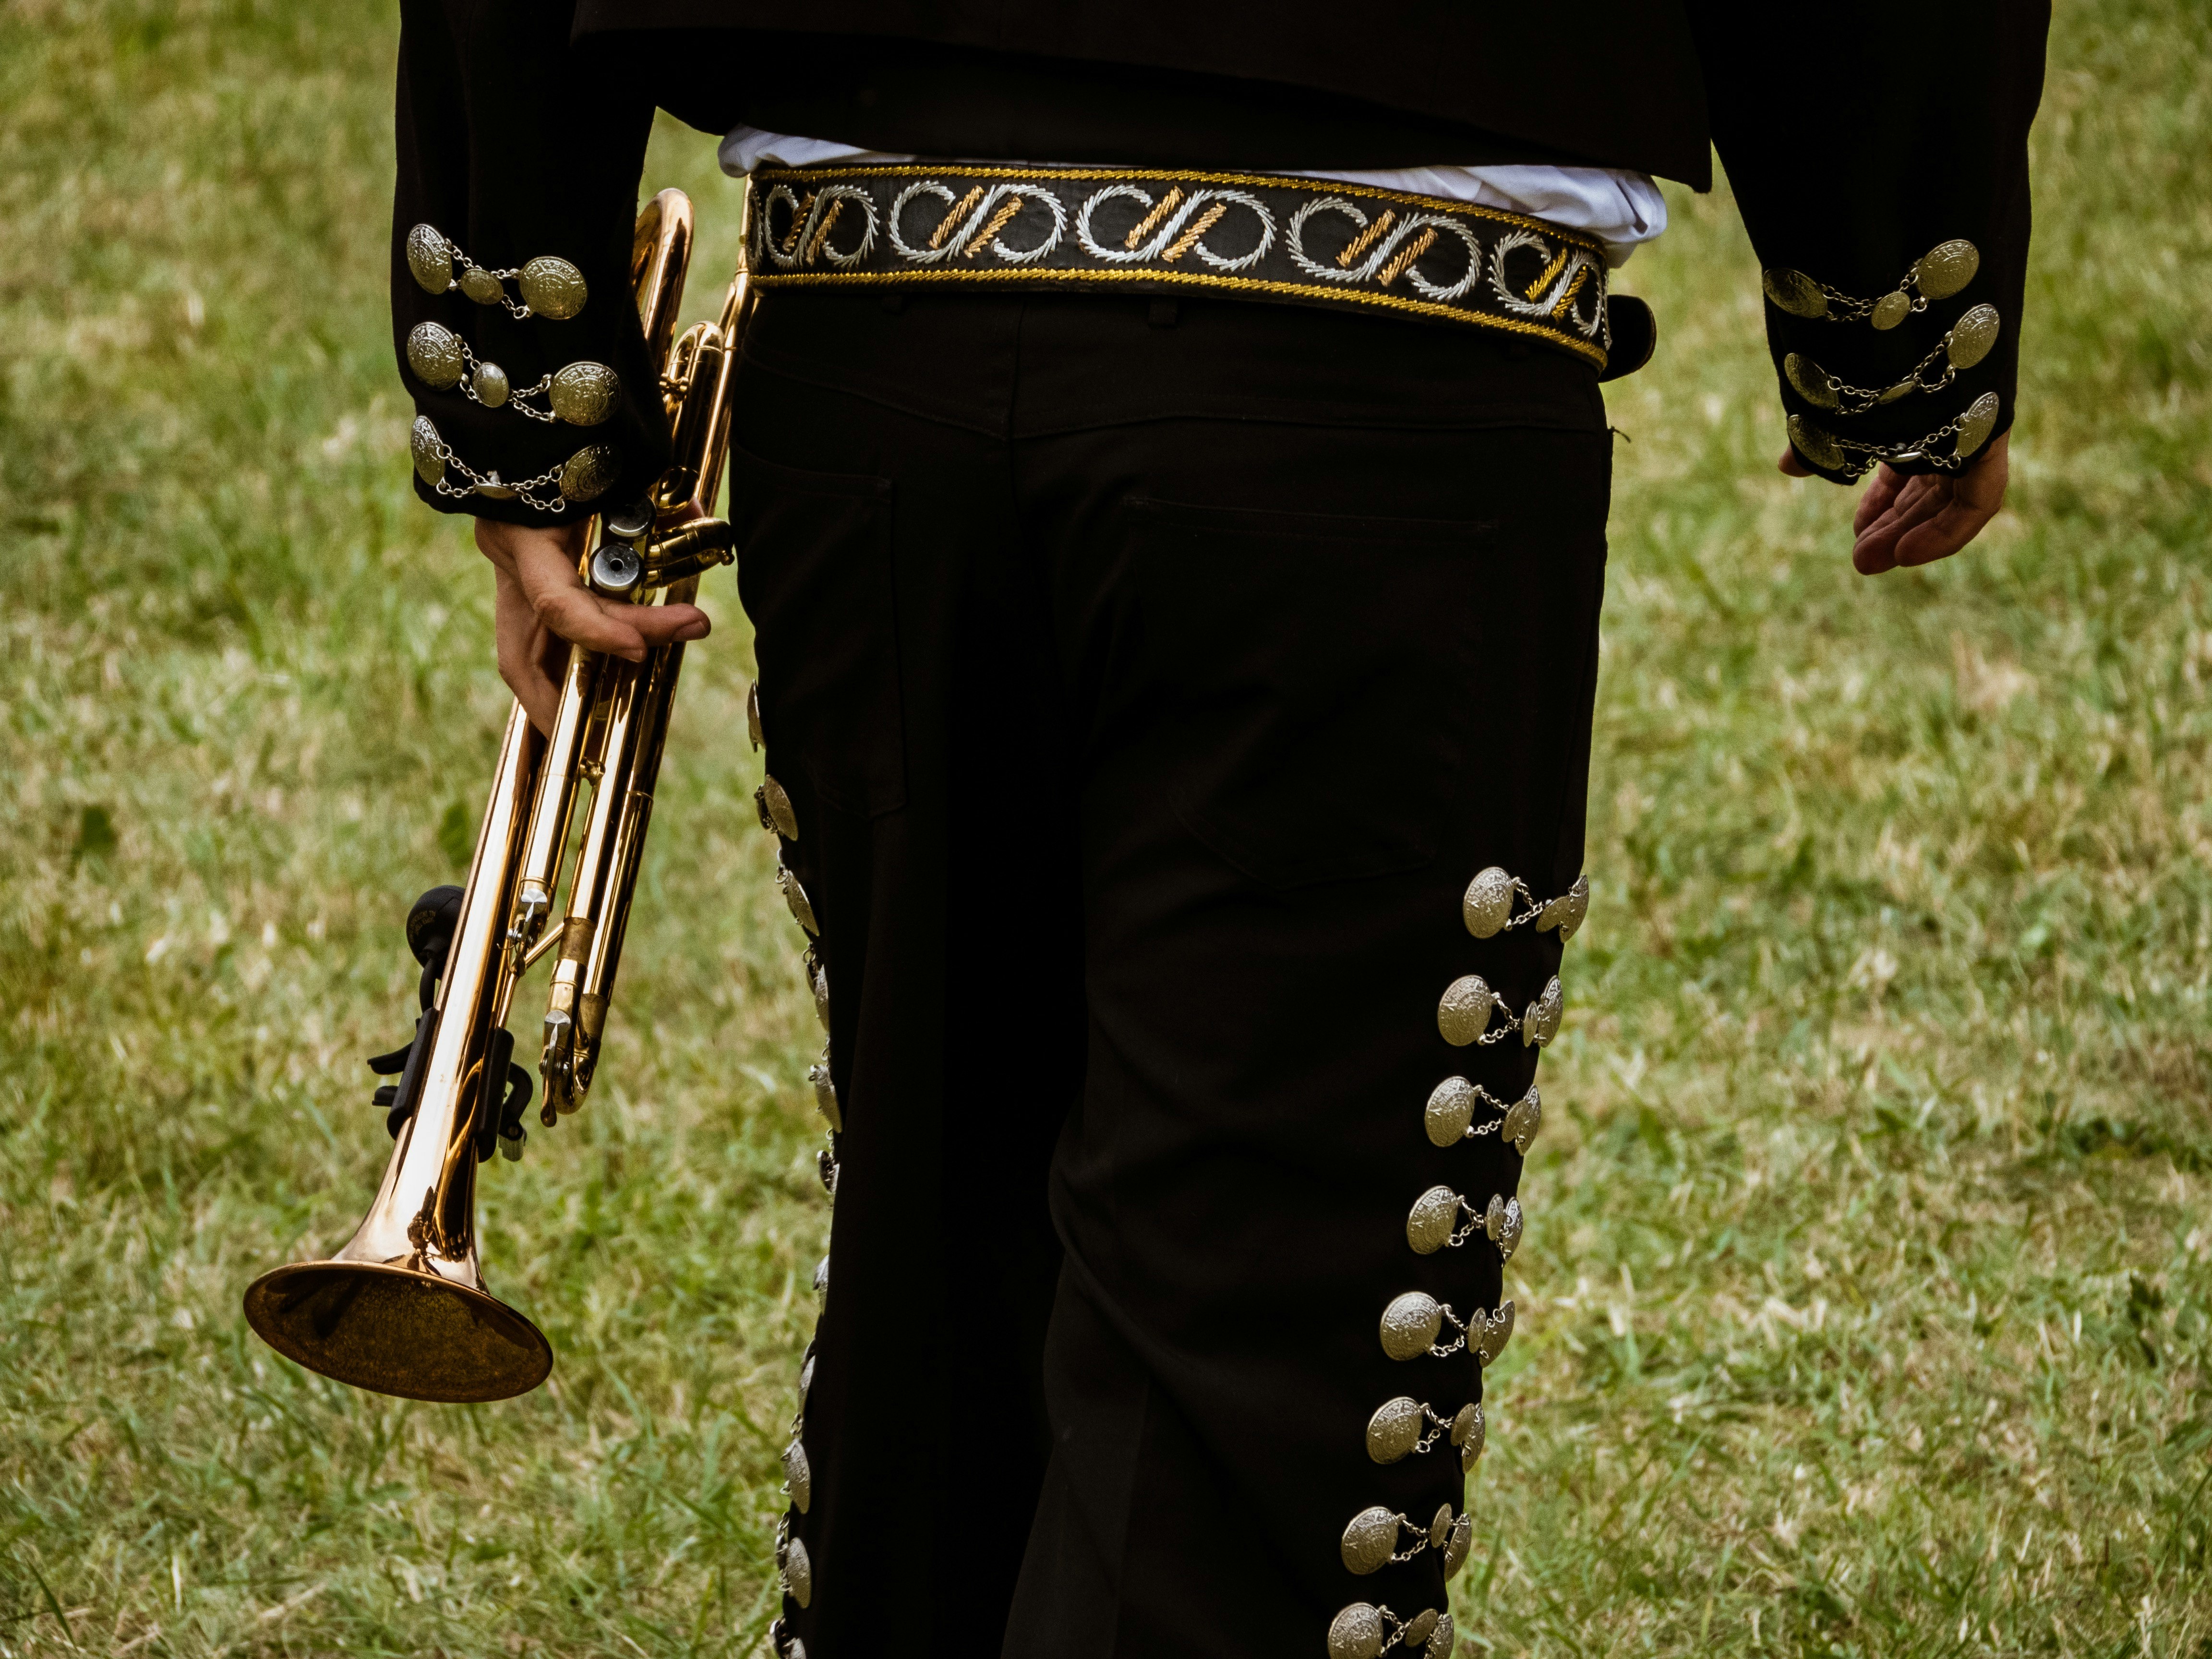 close-up photography of person holding trombone